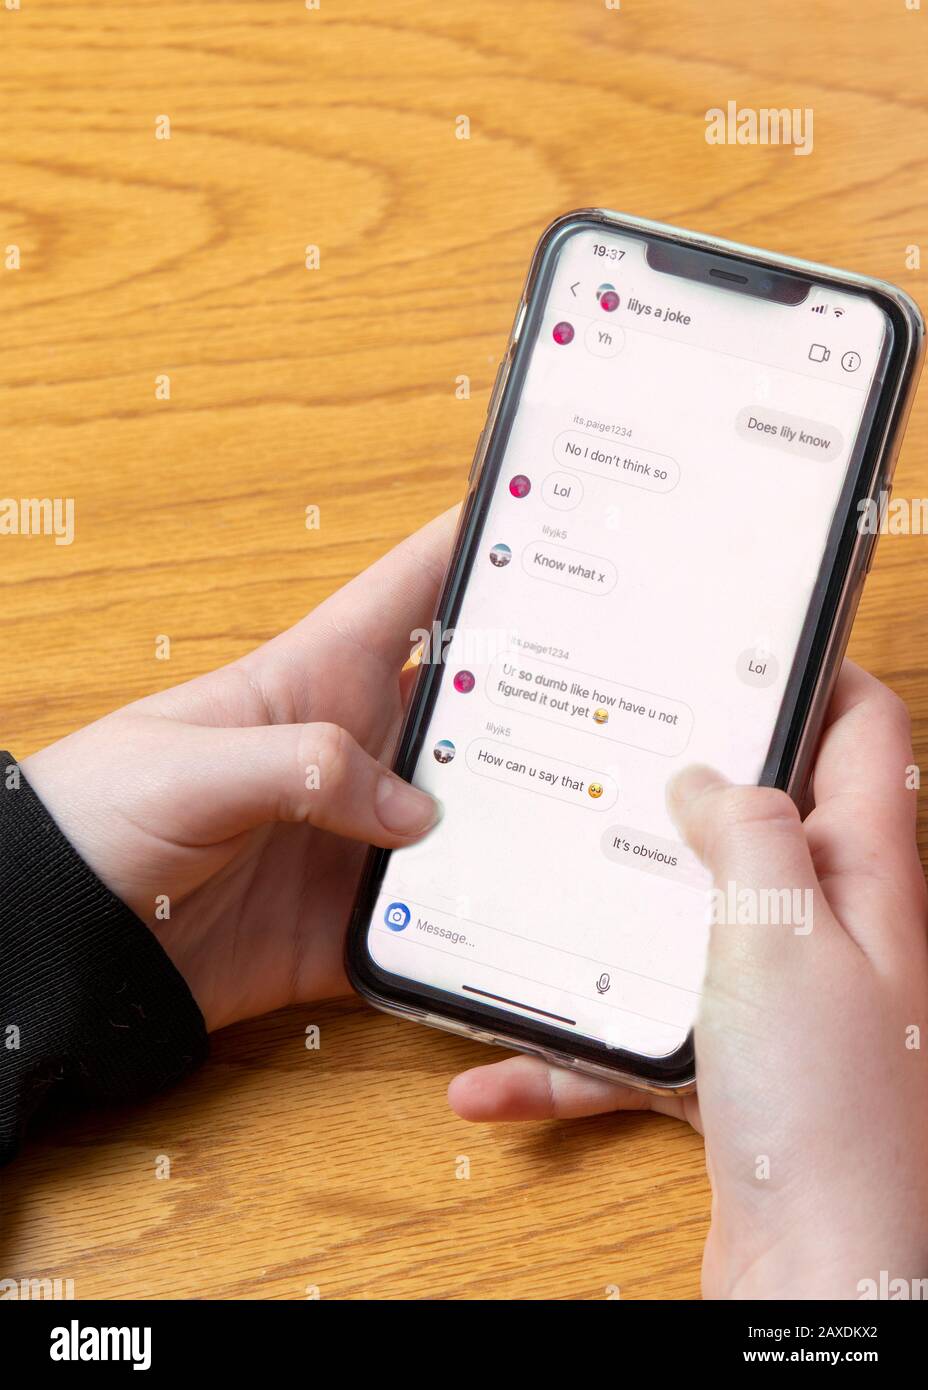 teenage girl being a cyber bully or being abused  on social media text on phone , hand level  copy space above Stock Photo